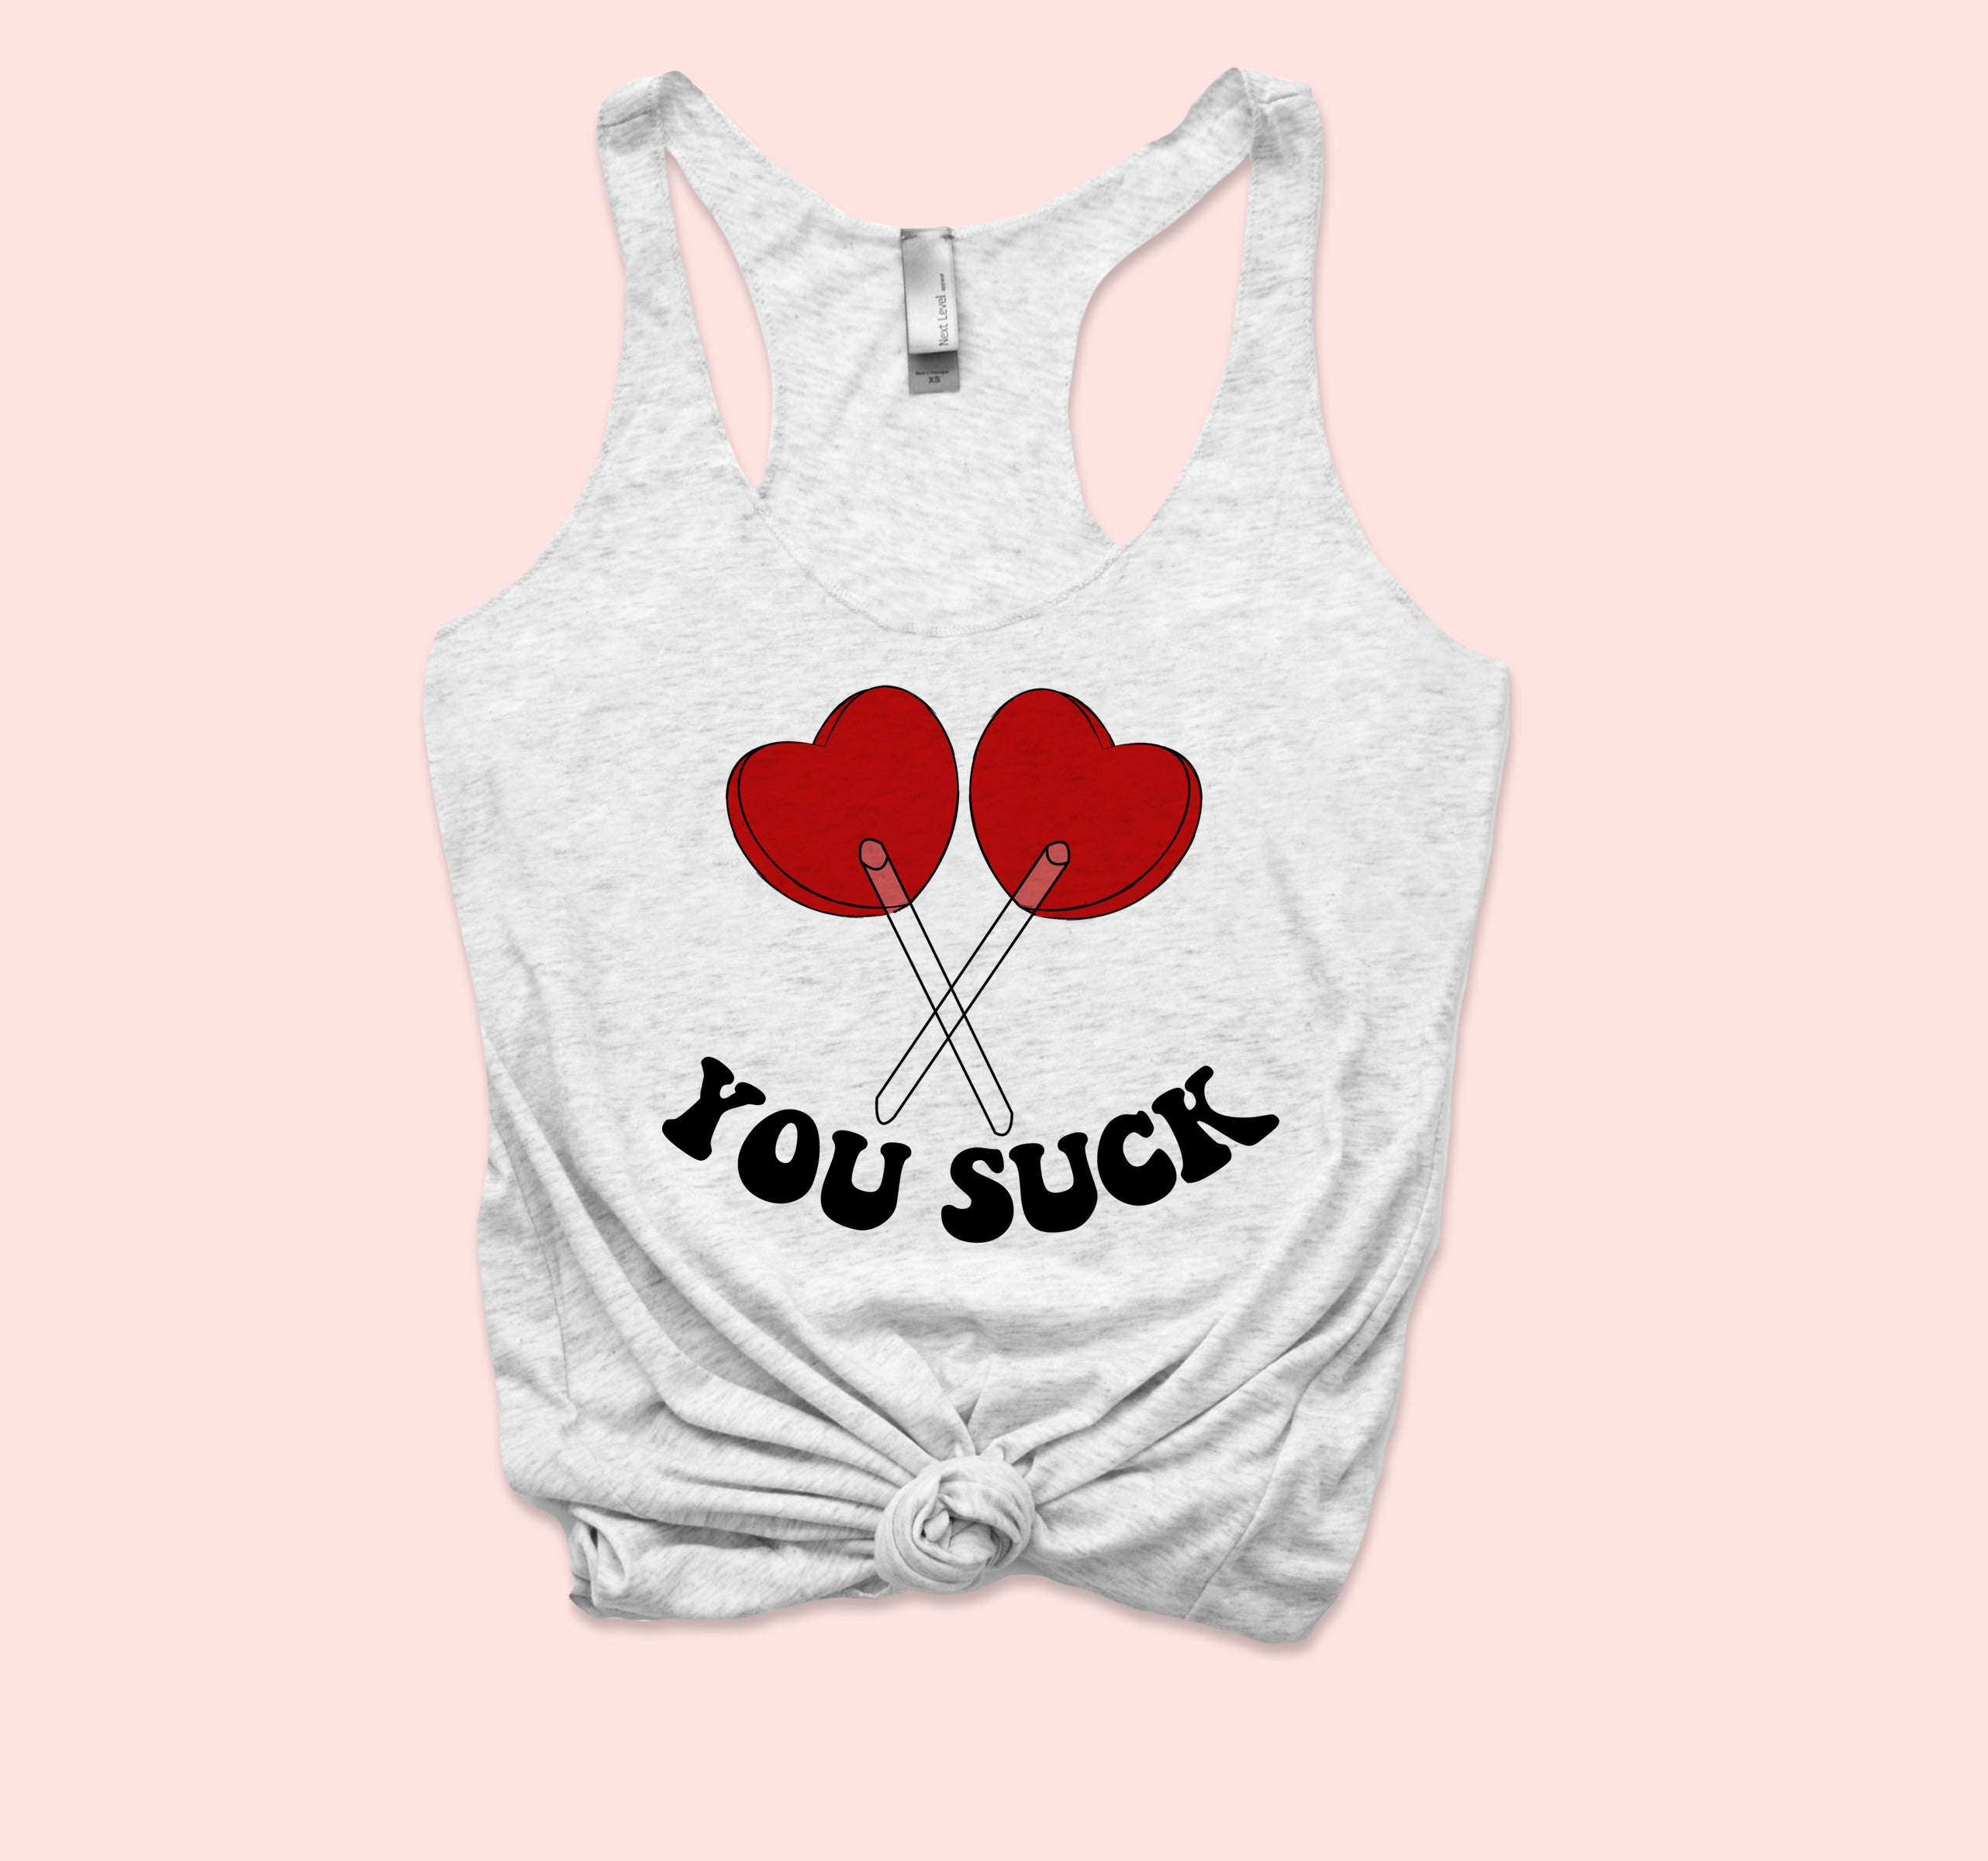 Whit tank top with two suckers that says you suck - HighCiti